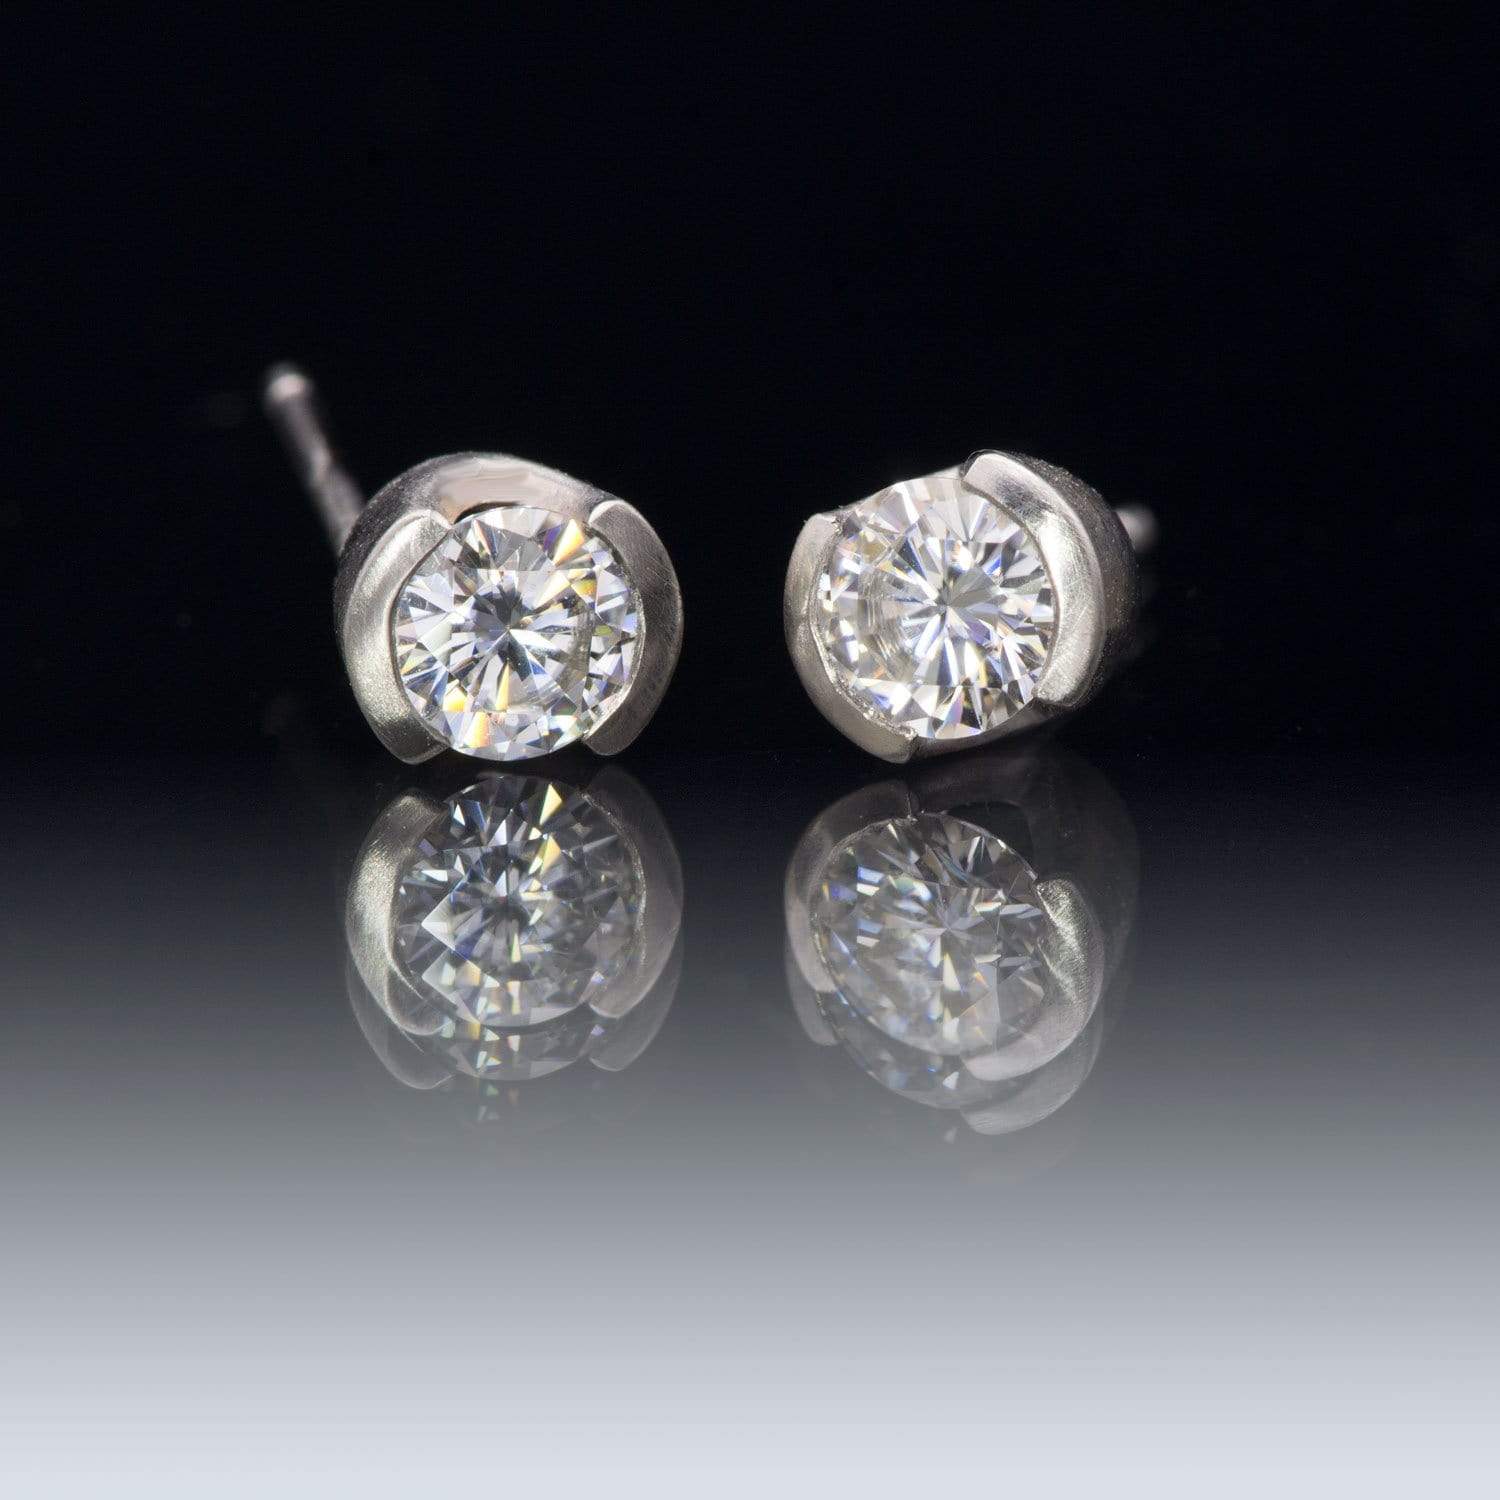 Forever One Moissanite Half Bezel Gold or Platinum Studs Earrings 4mm Near-colorless Forever One Moissanite / 14k White Gold (contains Nickel - Rhodium-Plated) Earrings by Nodeform